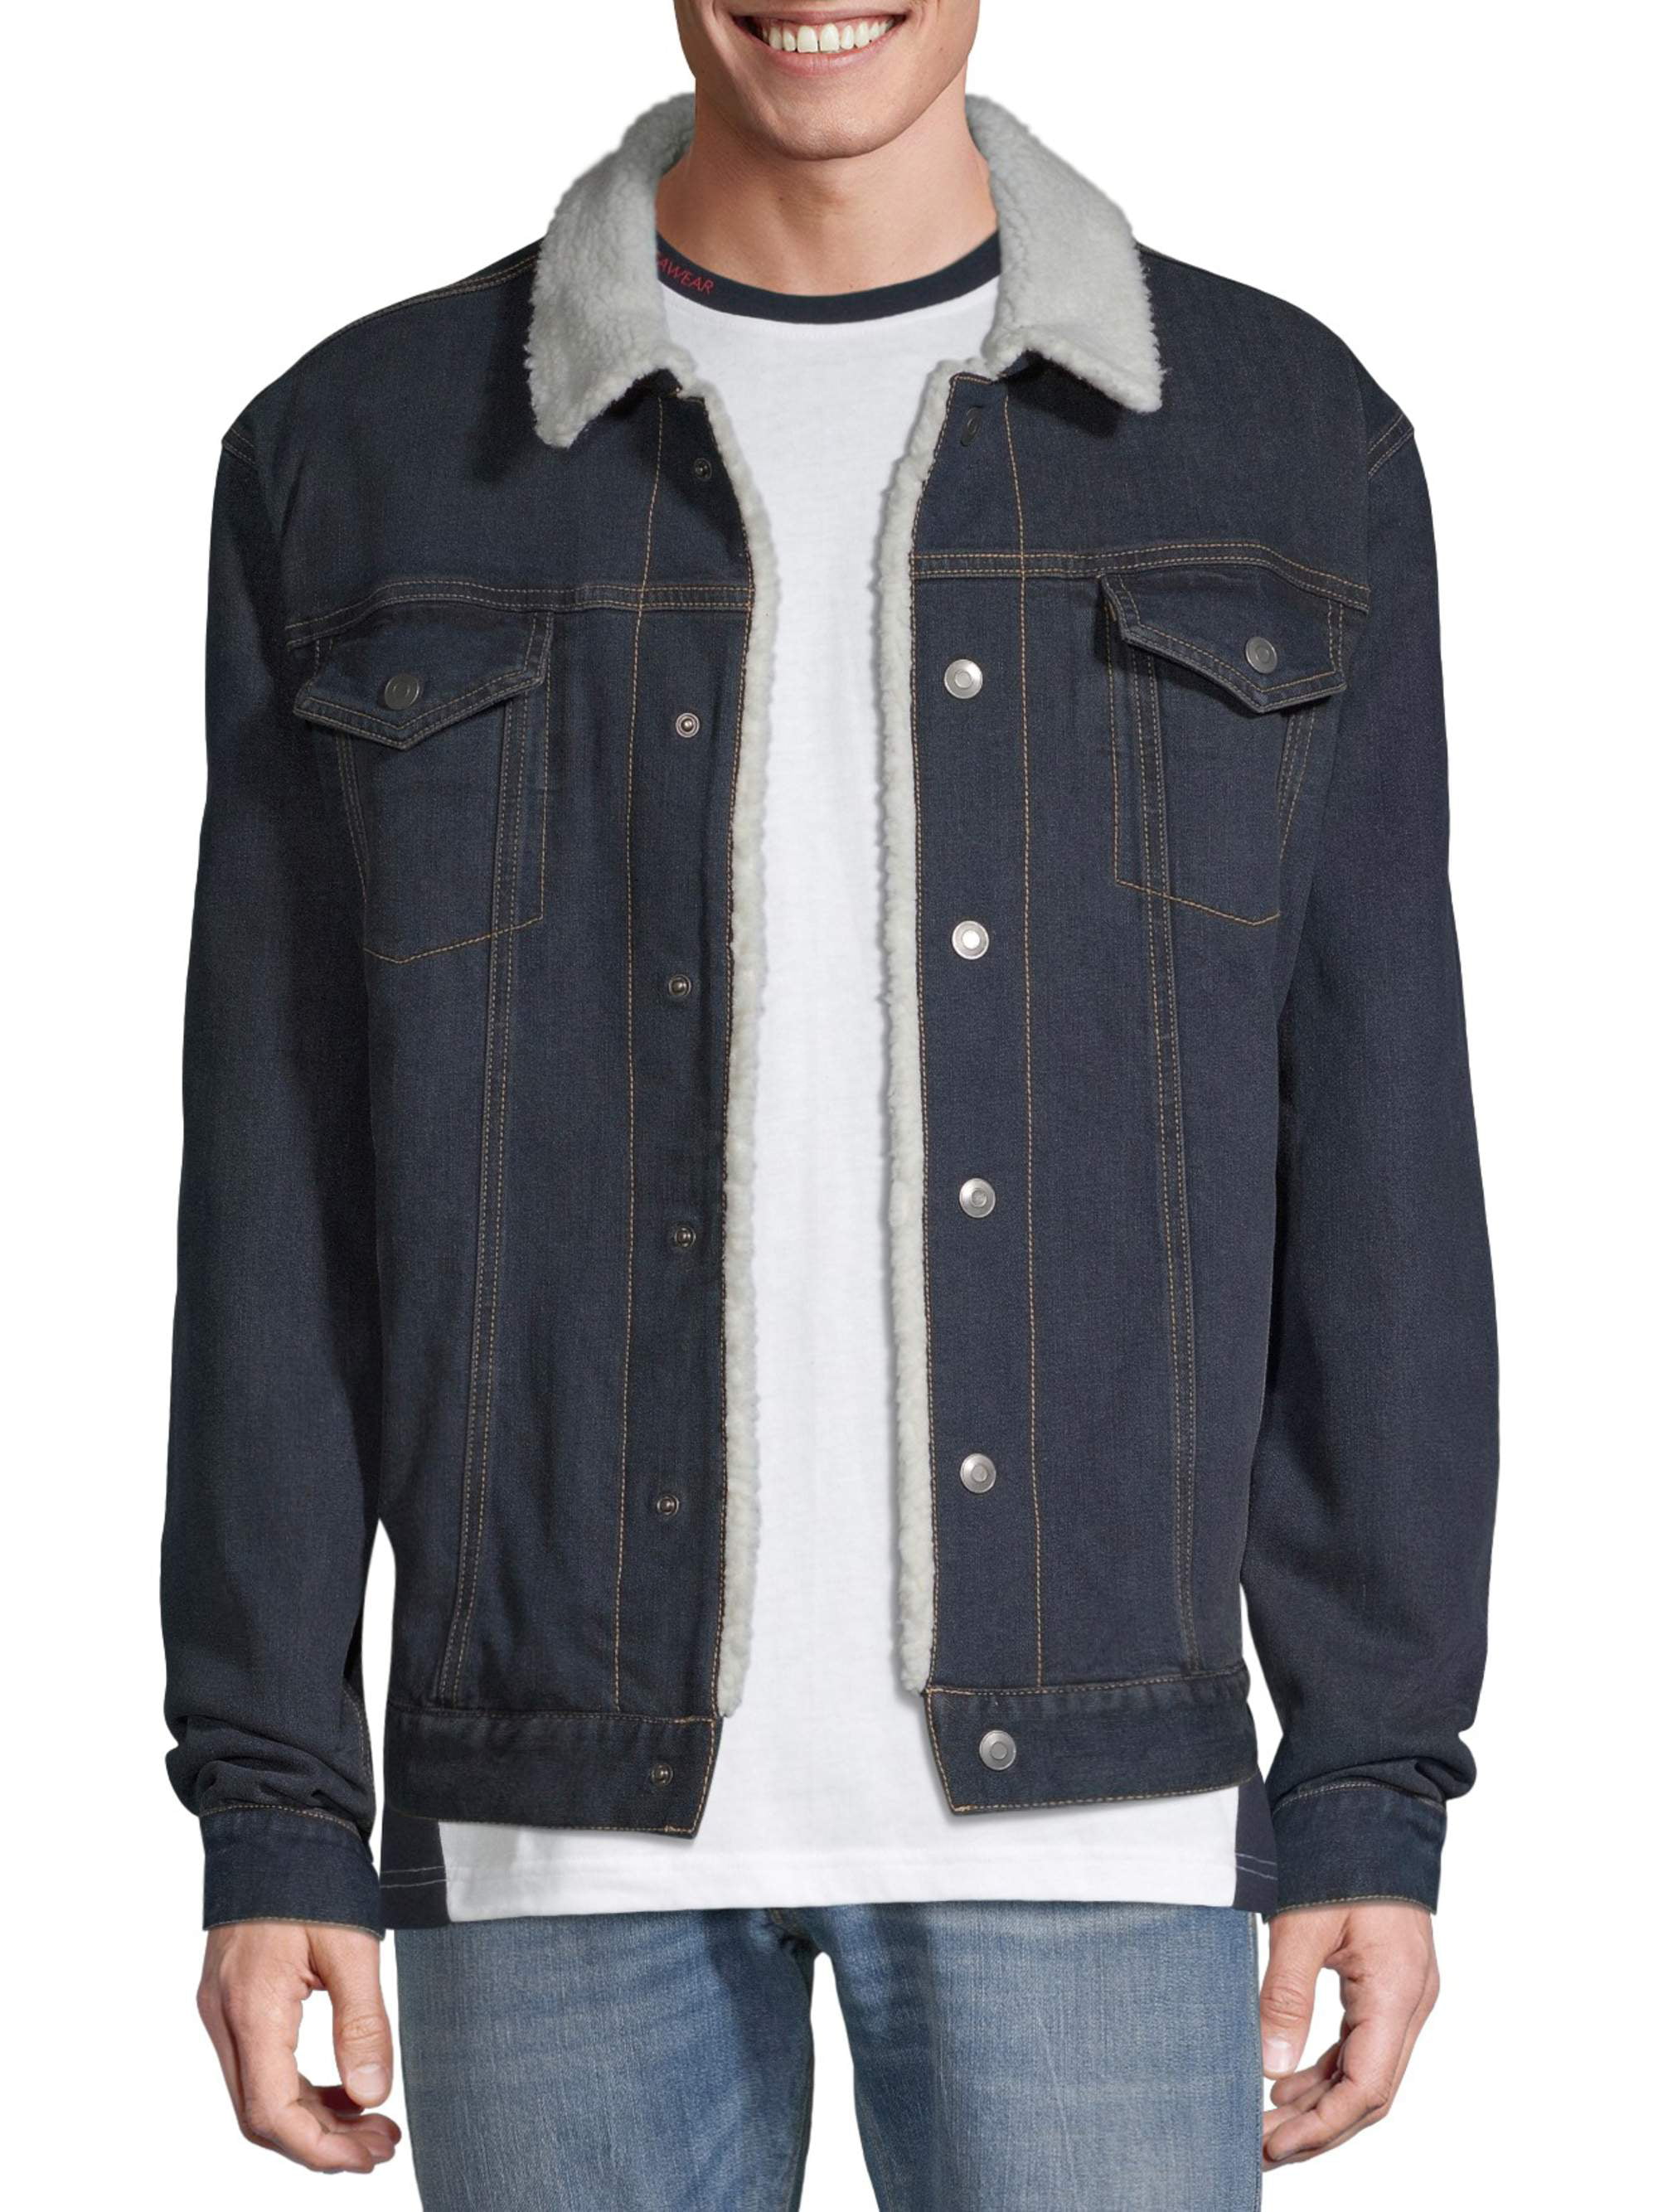 George Men's and Big Men's Sherpa Lined Denim Jacket, up to Size 5XL ...